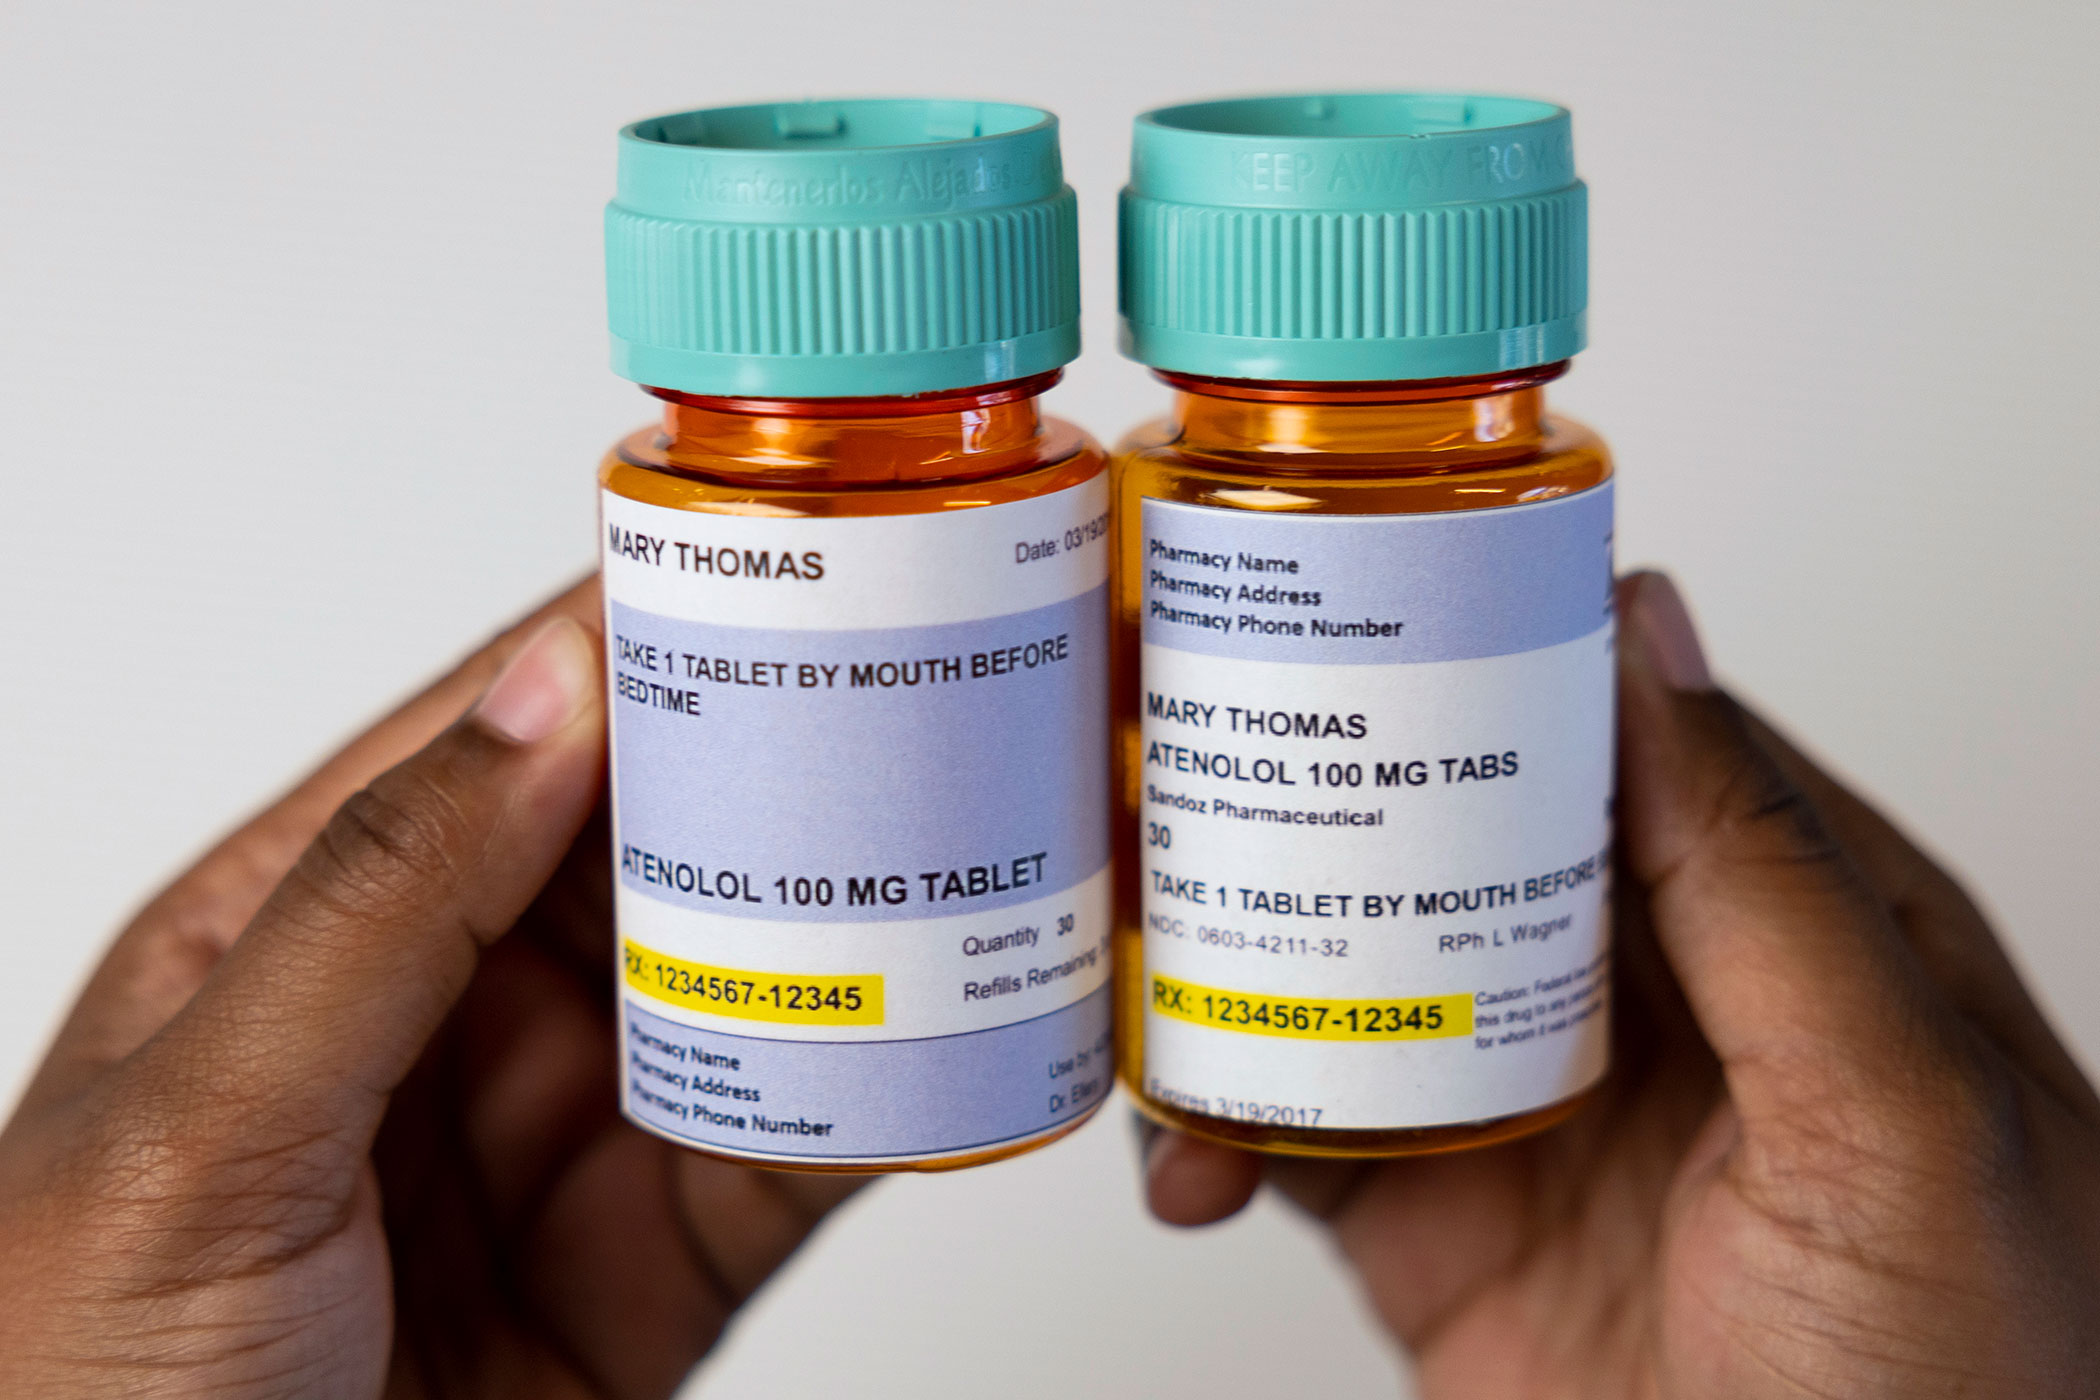 Patients Benefit from Easier-to-Read Prescription Labels | Mirage News